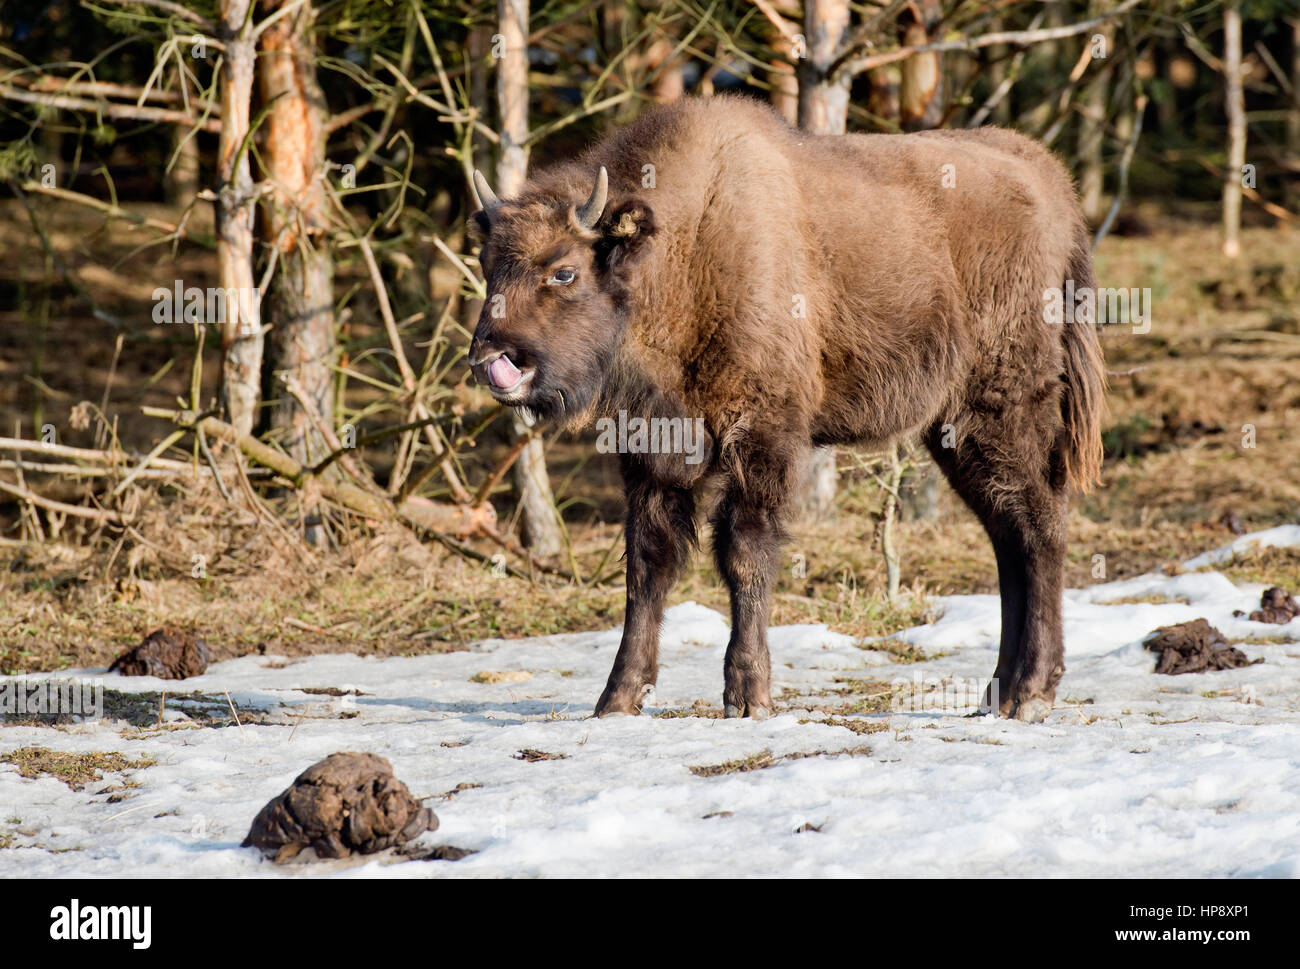 The European bison calf, which was born last year in Milovice, near Benatky na Jizerou, Czech Republic, 56 kilometres (31 miles) East of Prague, was named Tula on Thursday, February 16, 2017. In a former military area the bisons join a herd of wild horses and a group of aurochs. Big herbivores feed on grass and help to maintain a convenient environment for rare prairie species of herbs and insect.  (CTK Photo/Vit Simanek) Stock Photo